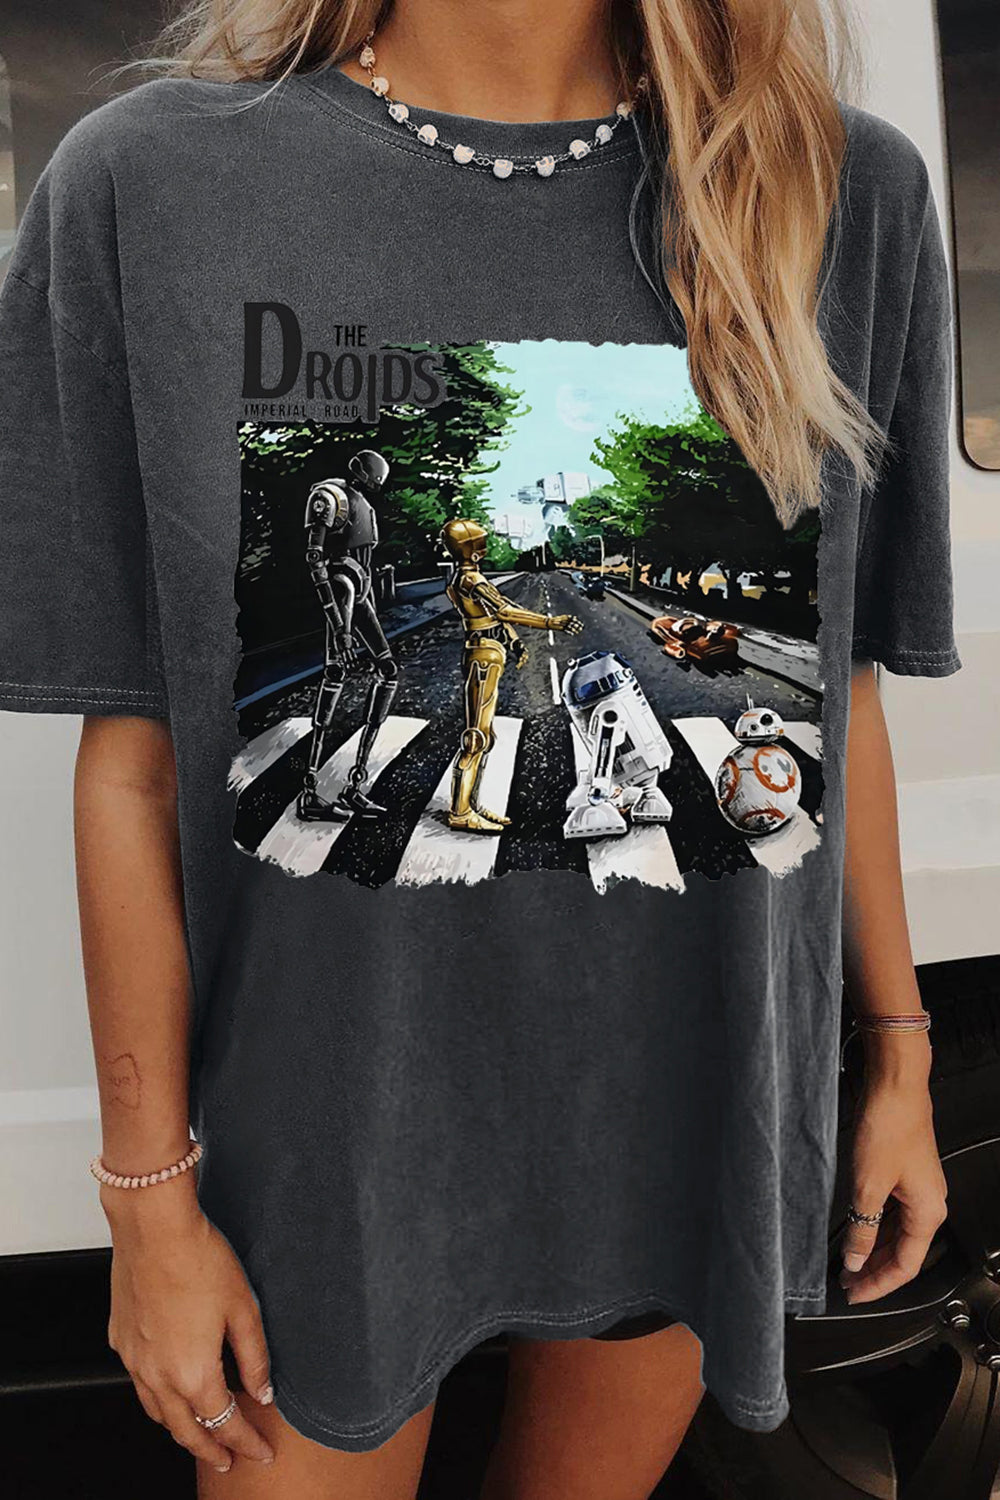 Star Wars Droids Abbey Road Graphic Tee For Women